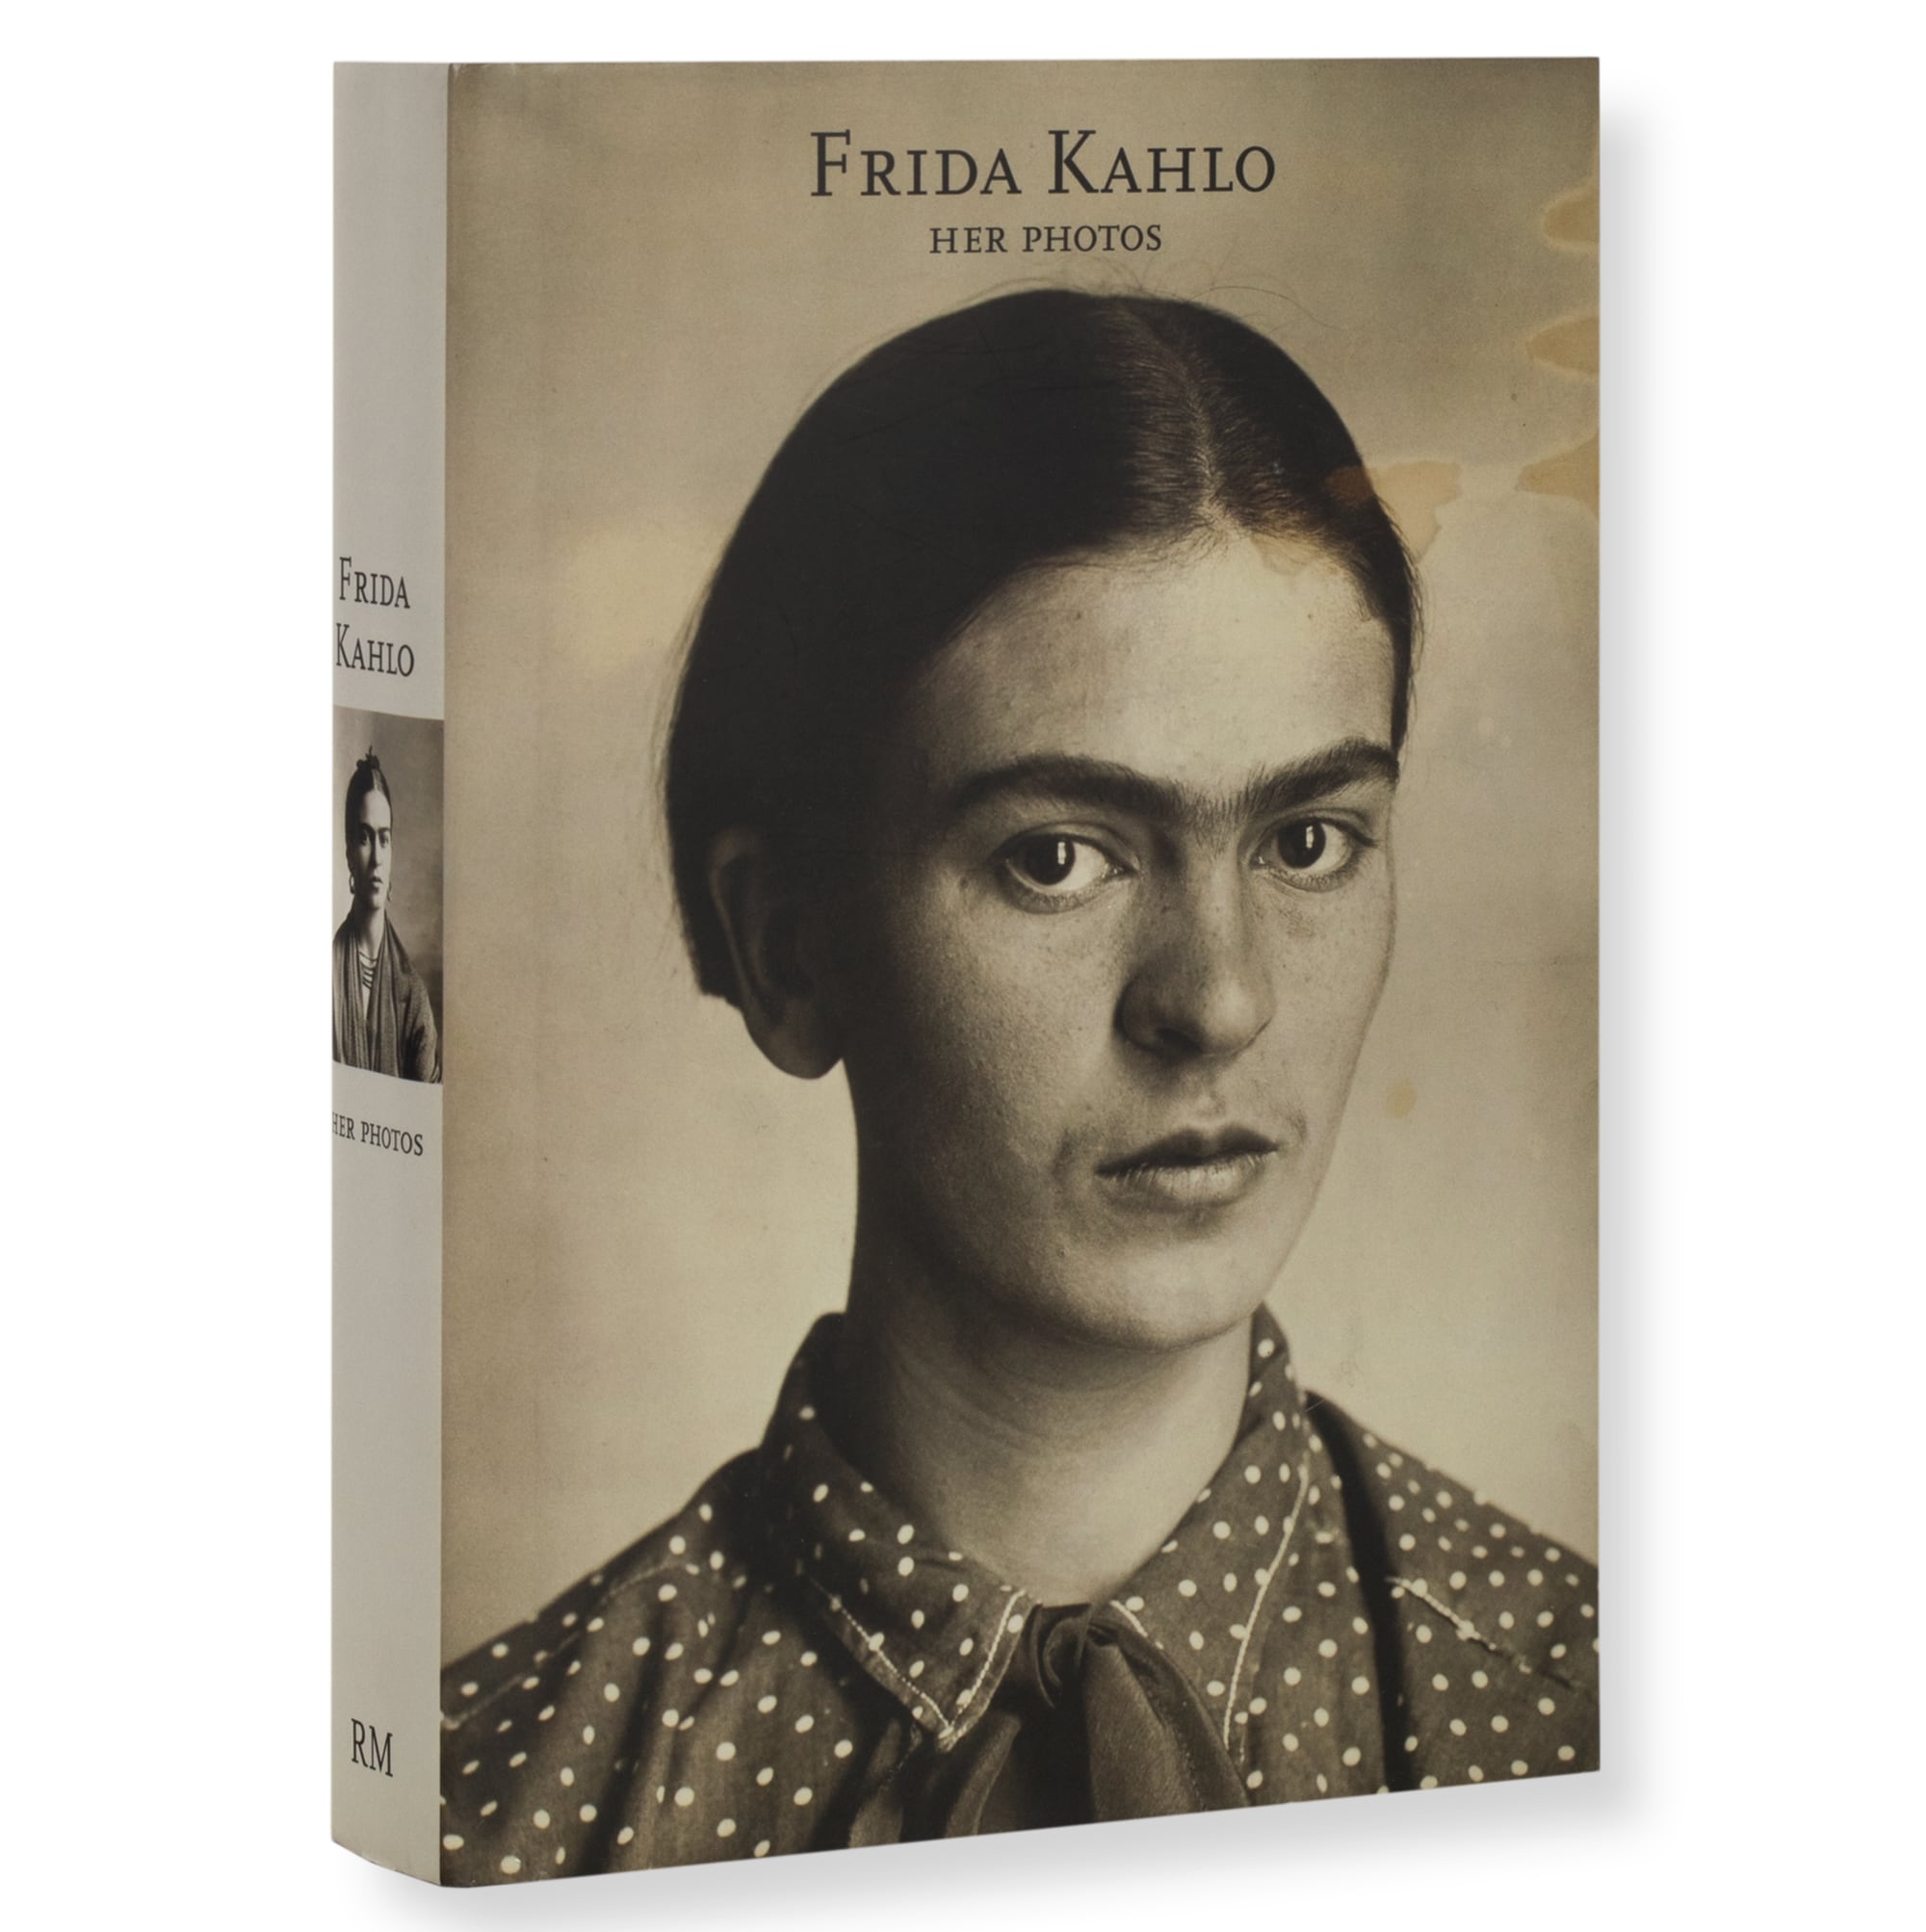 a book cover with a portrait of frida kahlo that says "frida kahlo her photos"